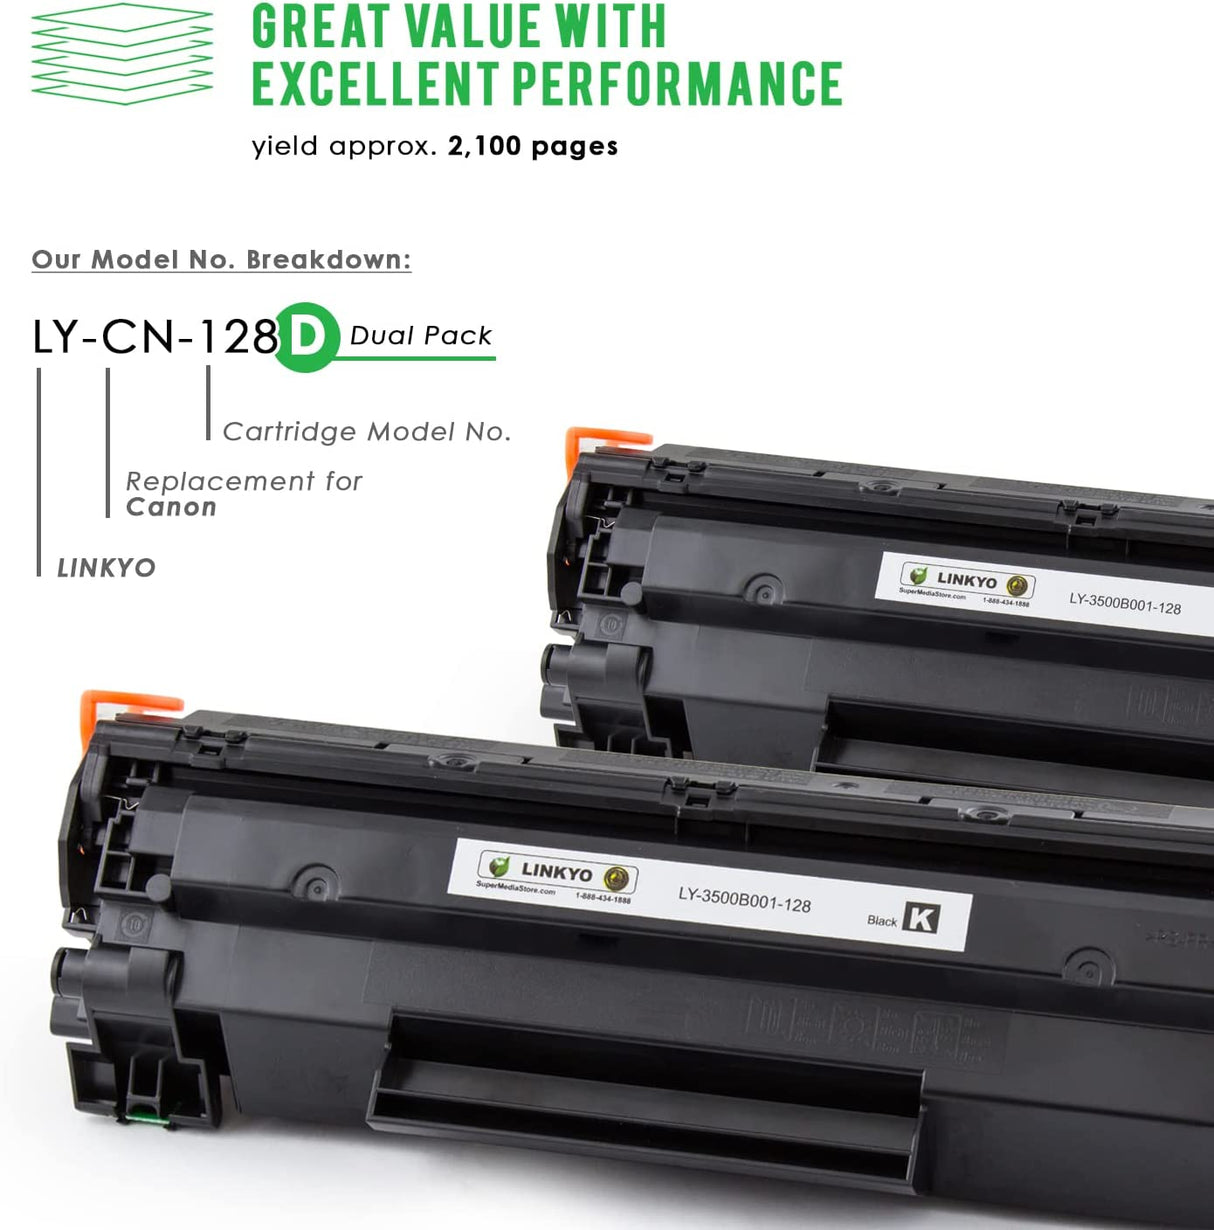 LINKYO Compatible Toner Cartridge Replacement for Canon 128 (Black, 2-Pack)